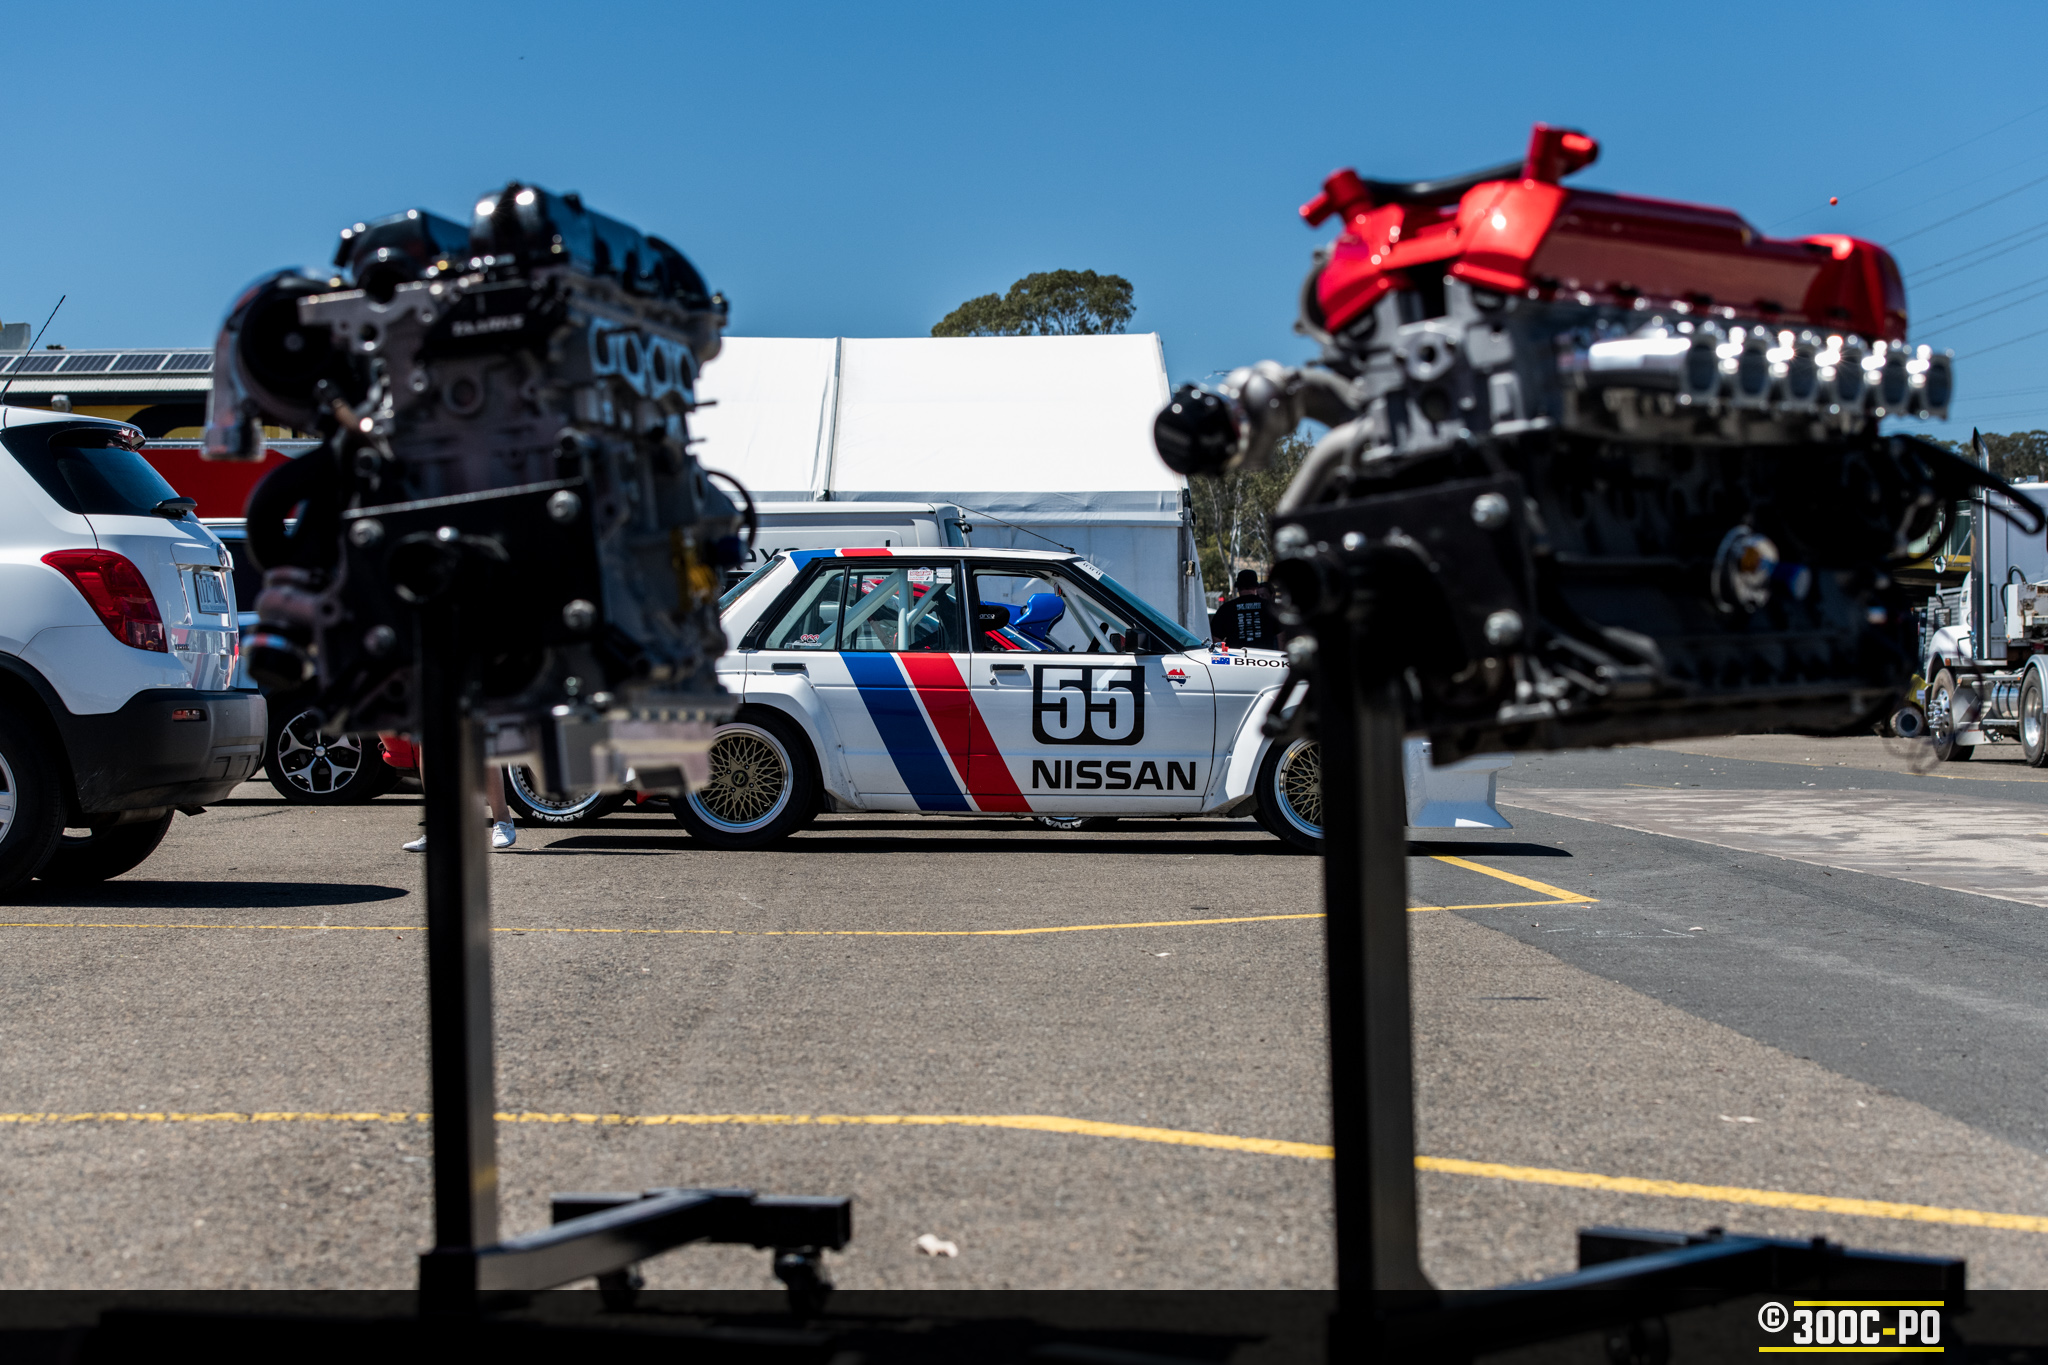 2017-10-12 - WTAC 2017 Test Day 025